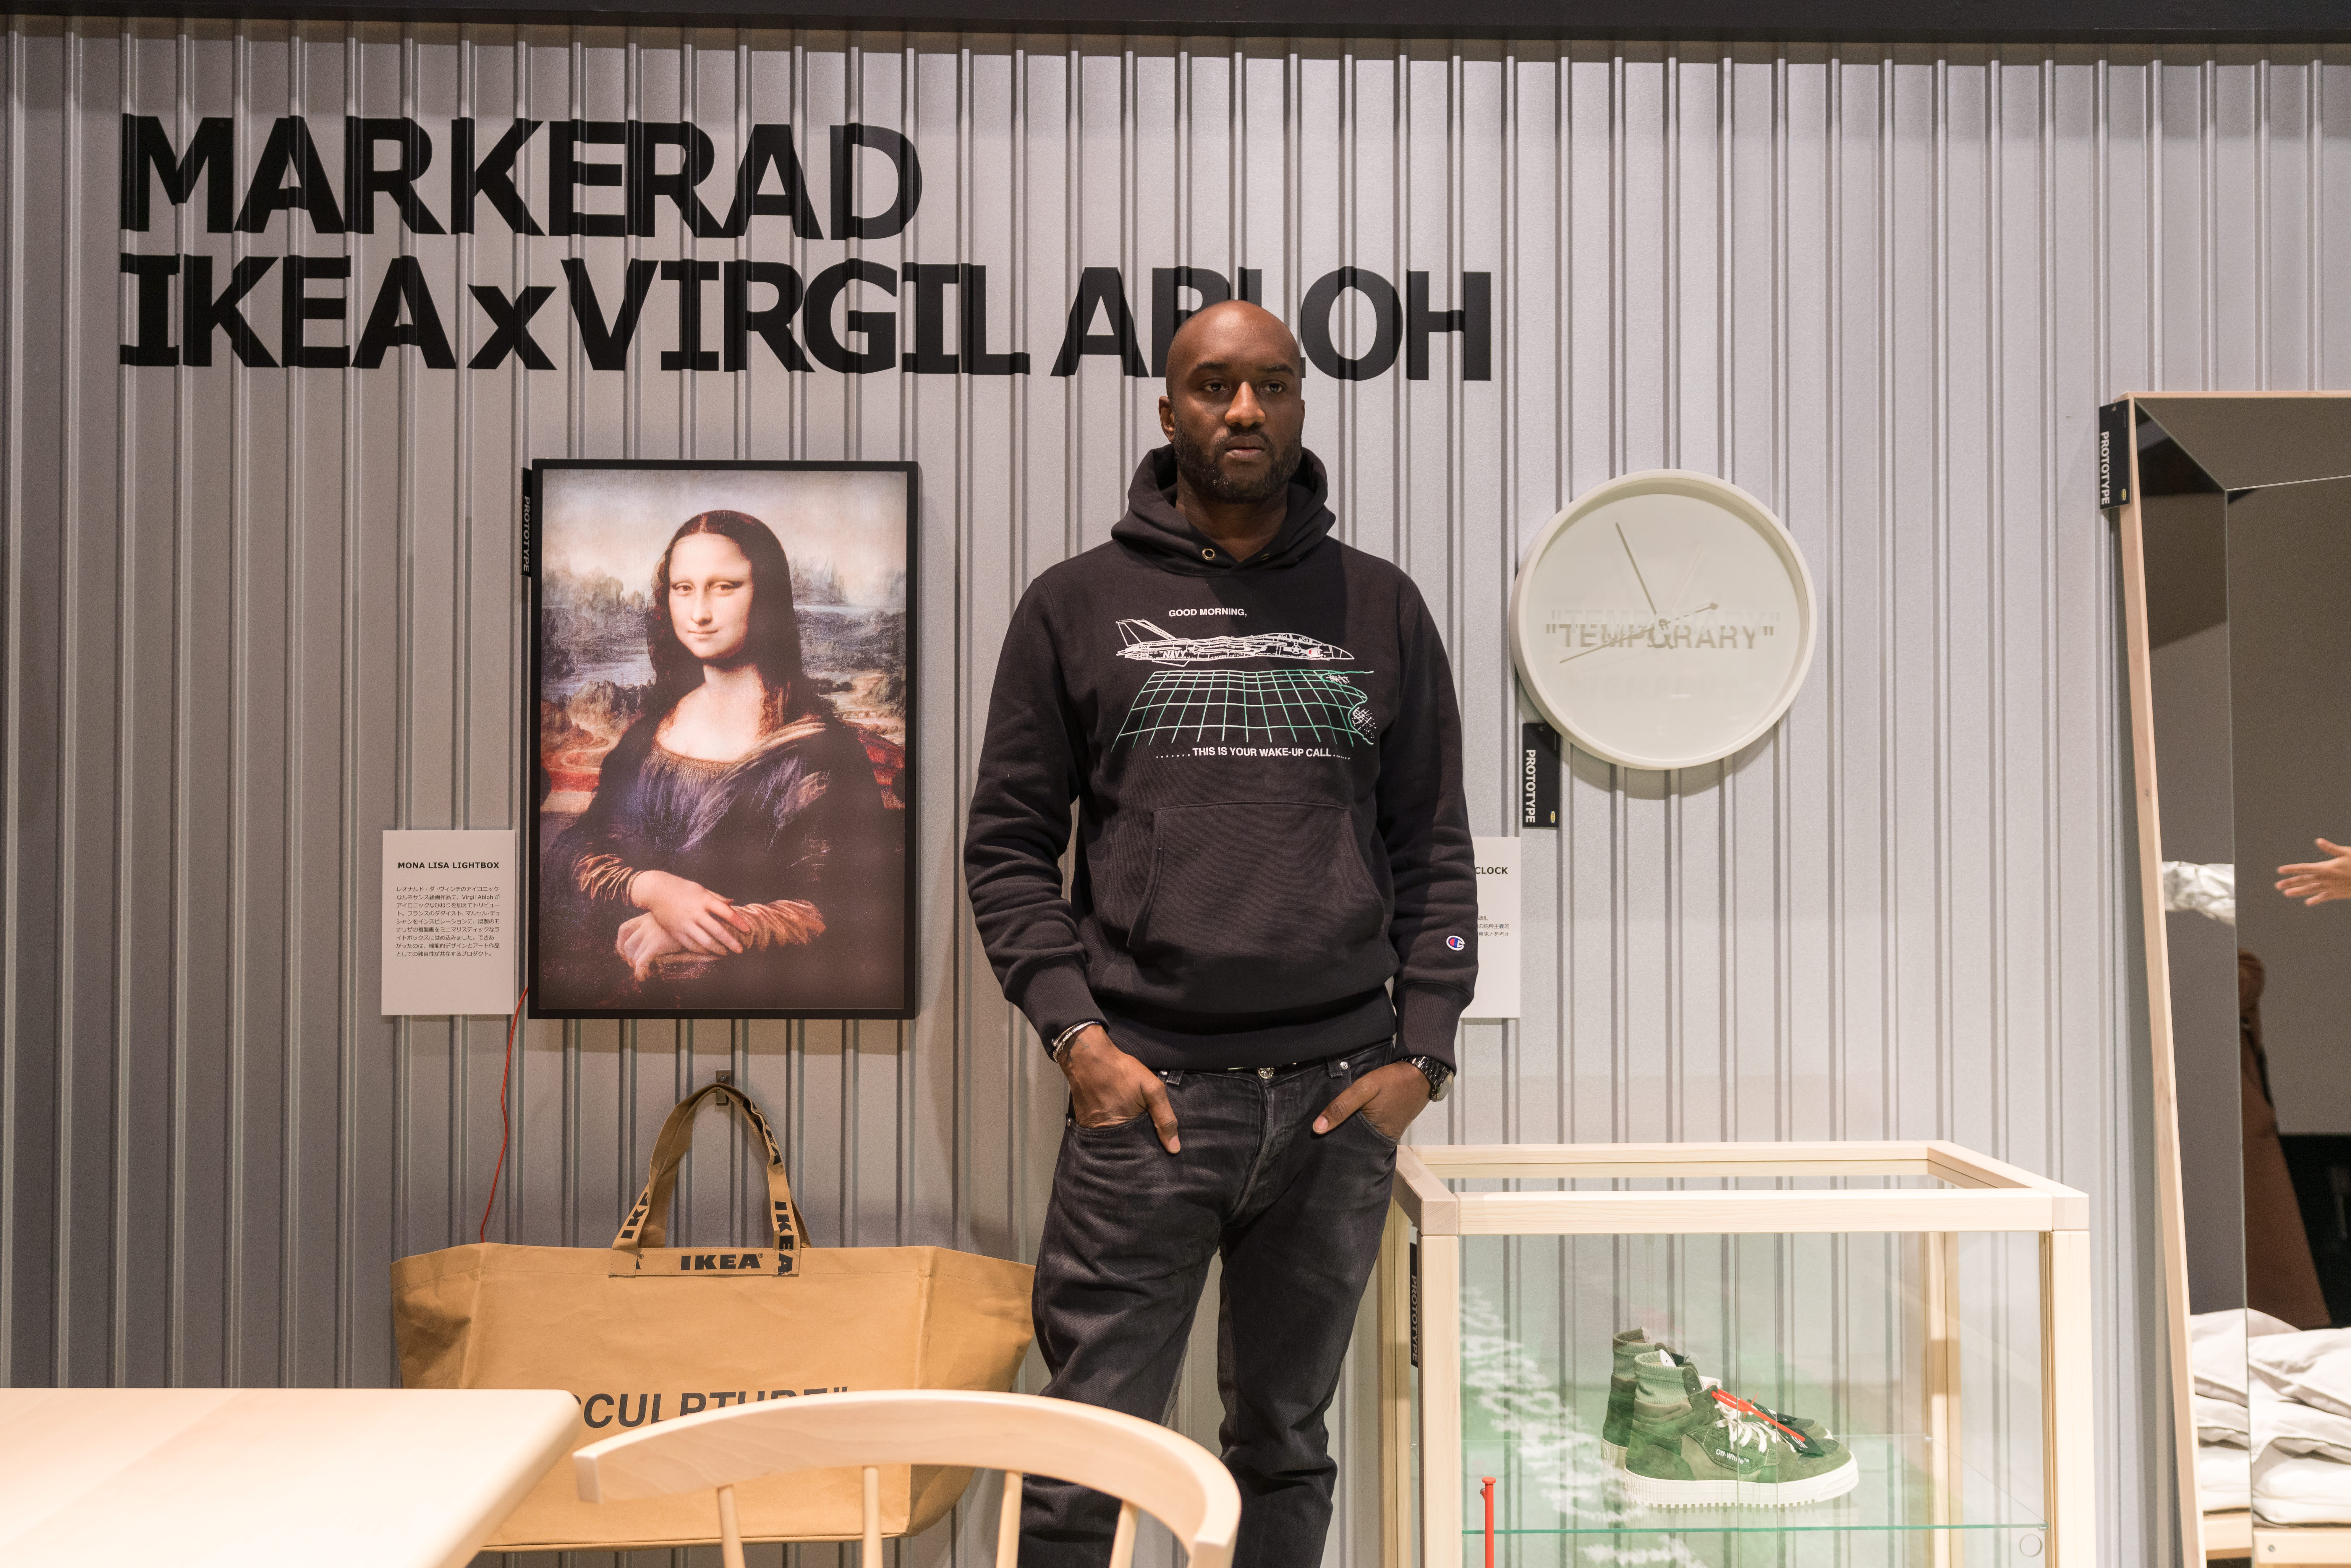 Get a Glimpse at MARKERAD, Virgil Abloh's Clever New Collection